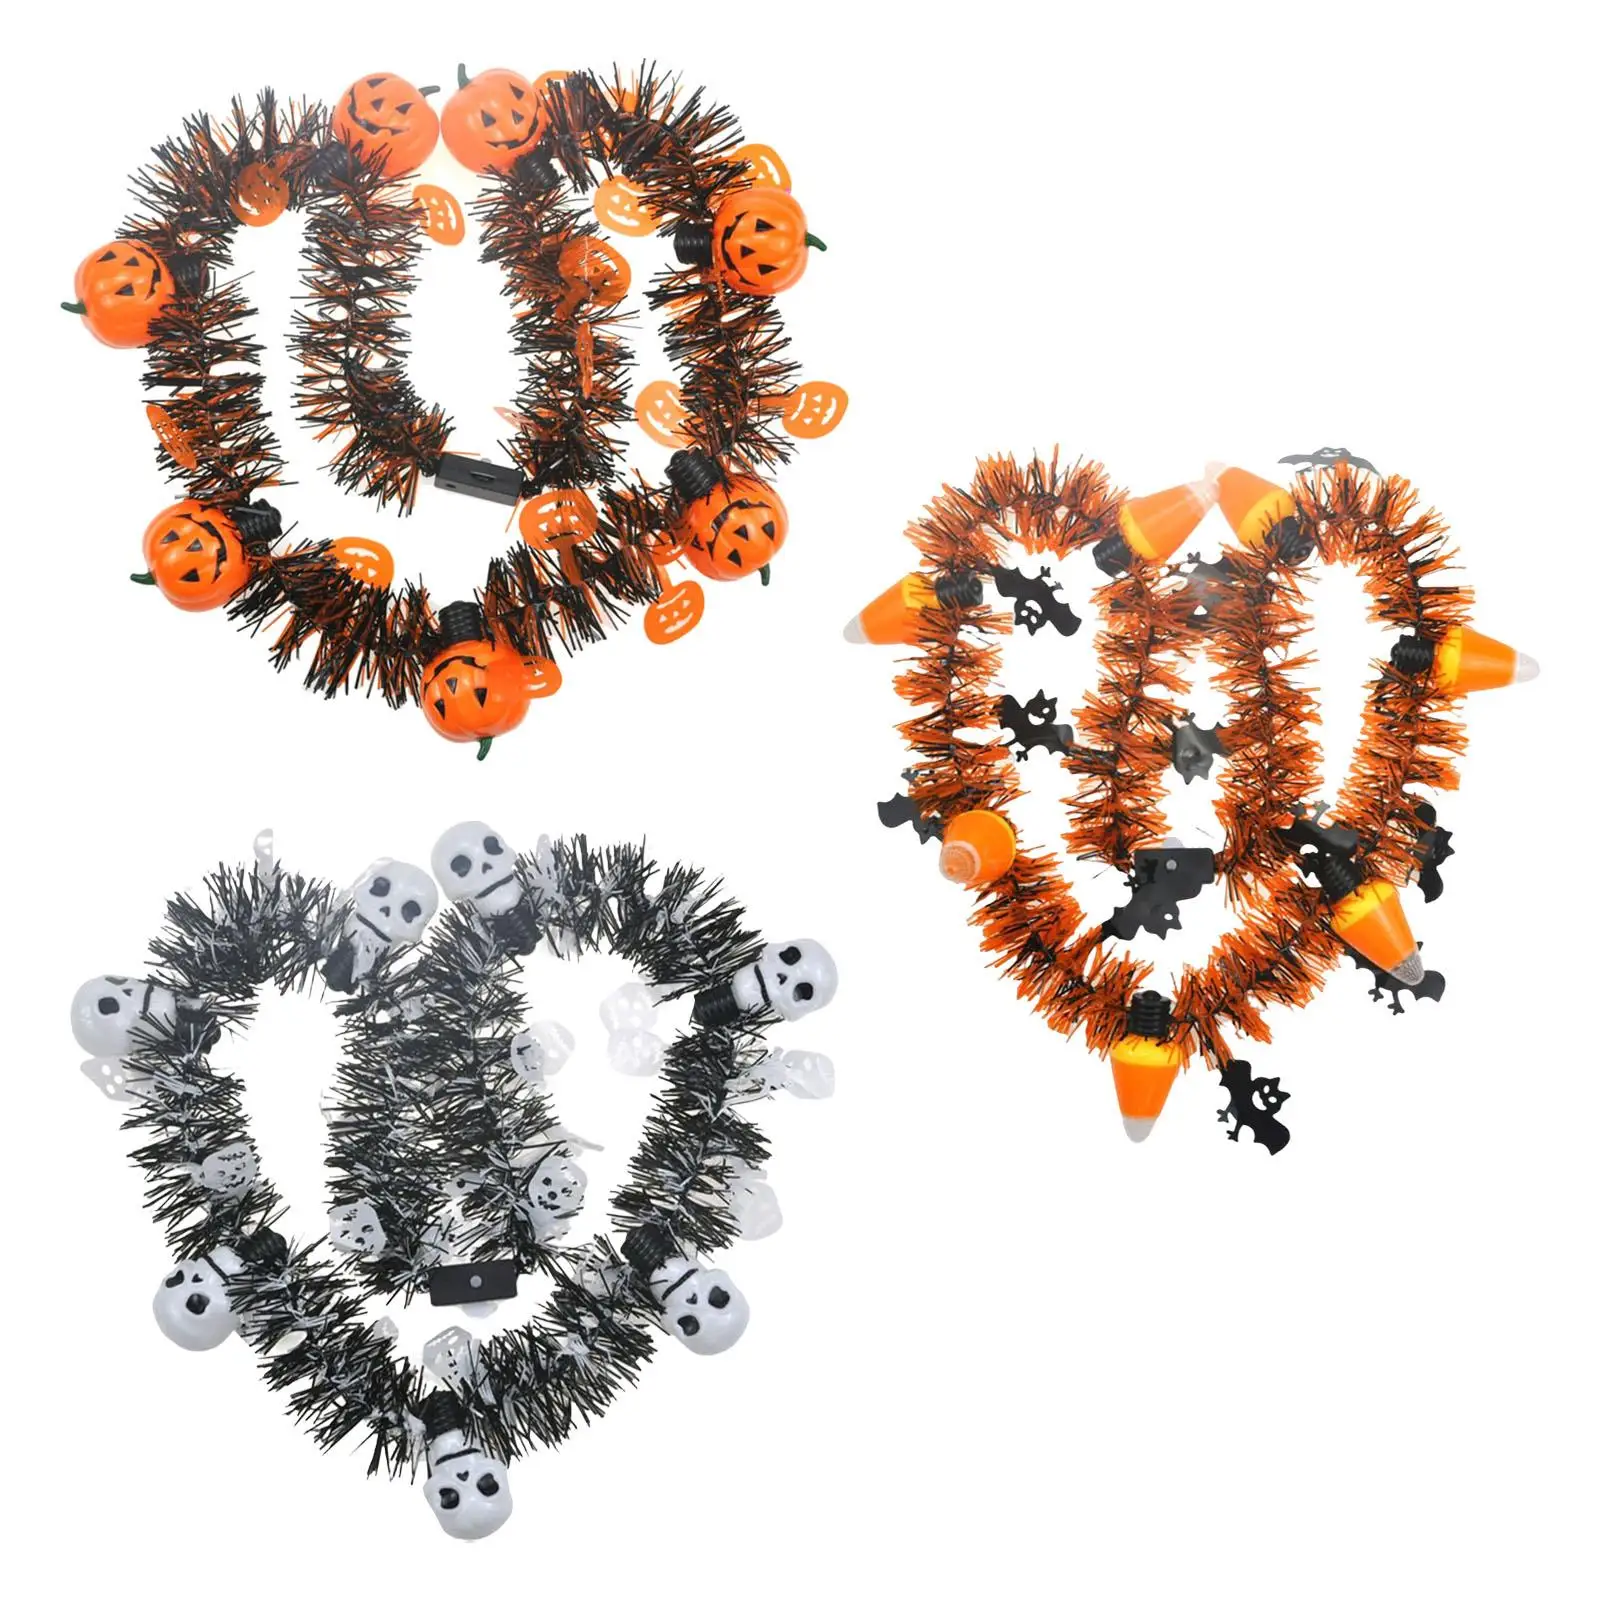 35inch Halloween String Light Battery Operated Wreath Lights Glowing Lanterns Lamp Necklace for Christmas Trees Indoor Garden